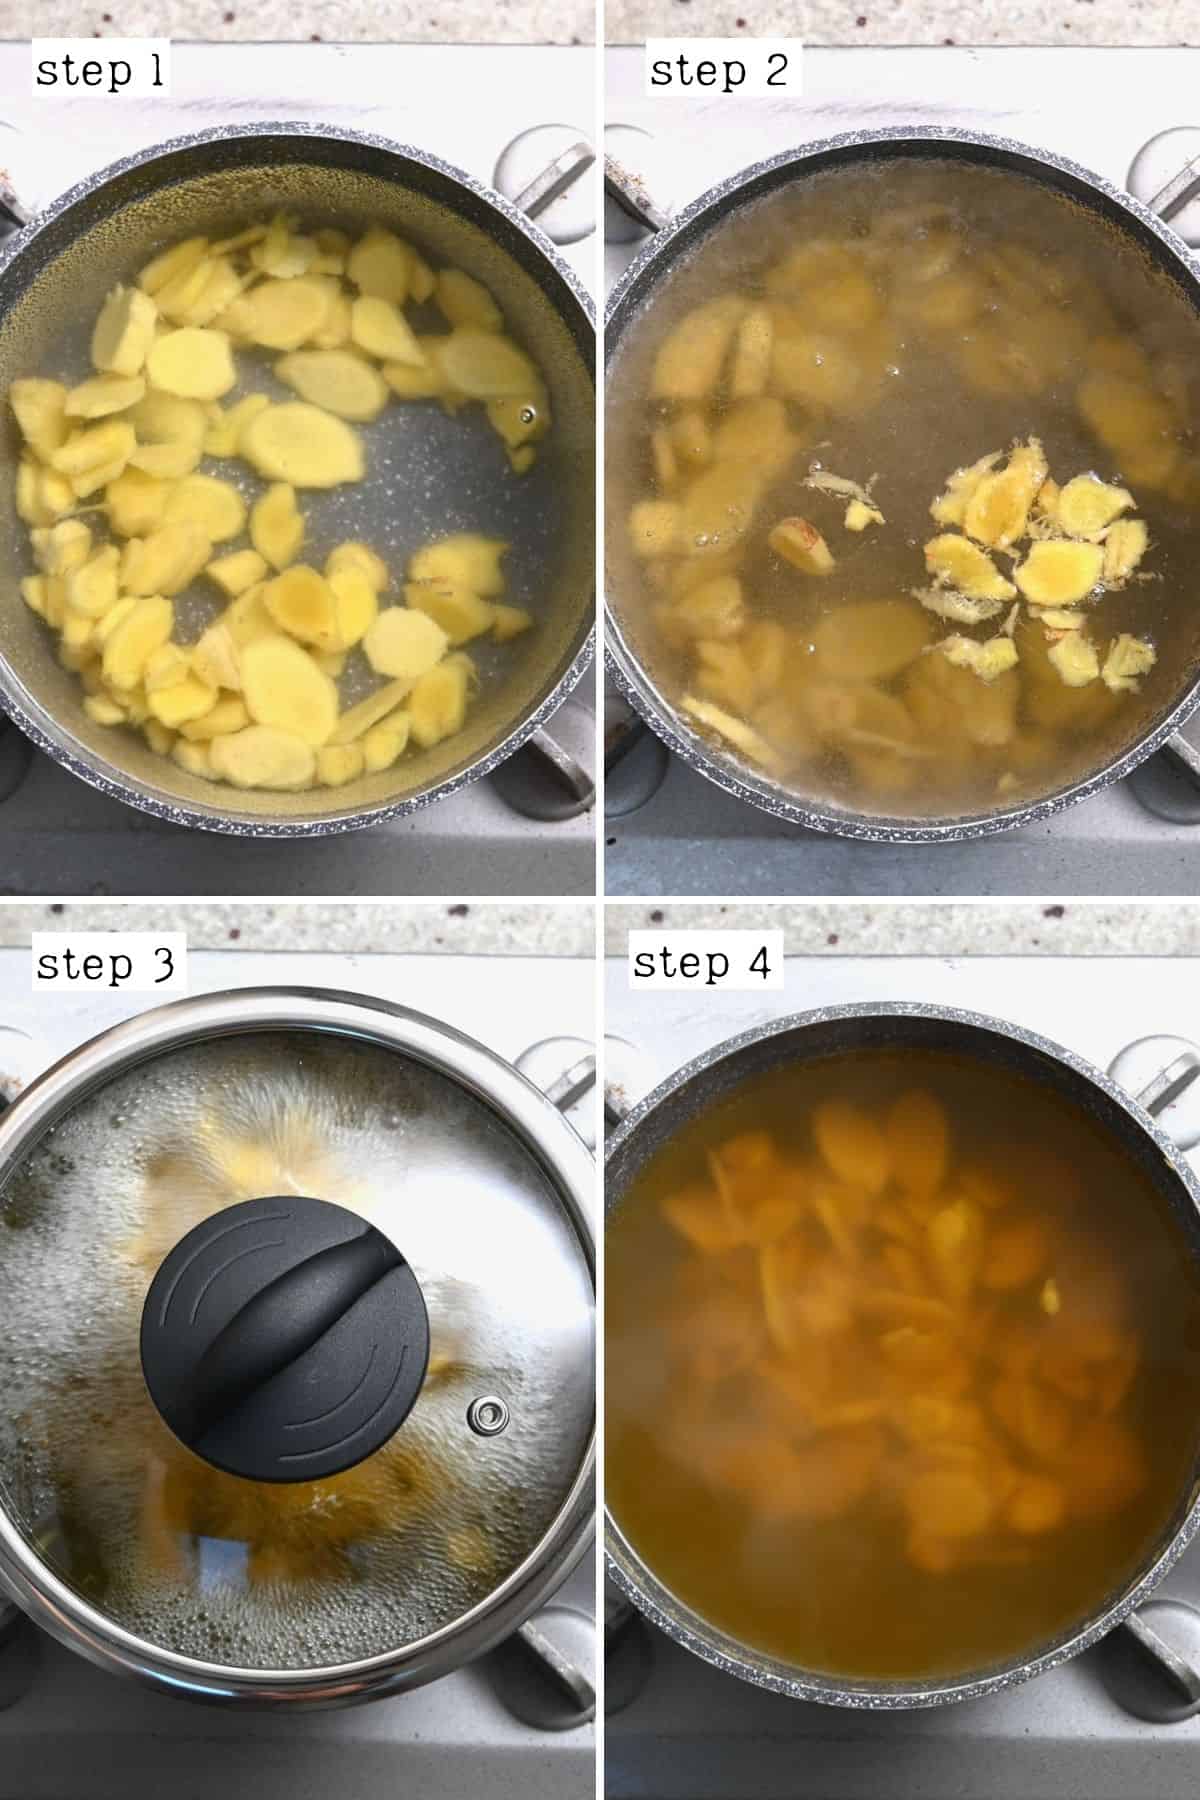 Steps for making concentrated ginger water